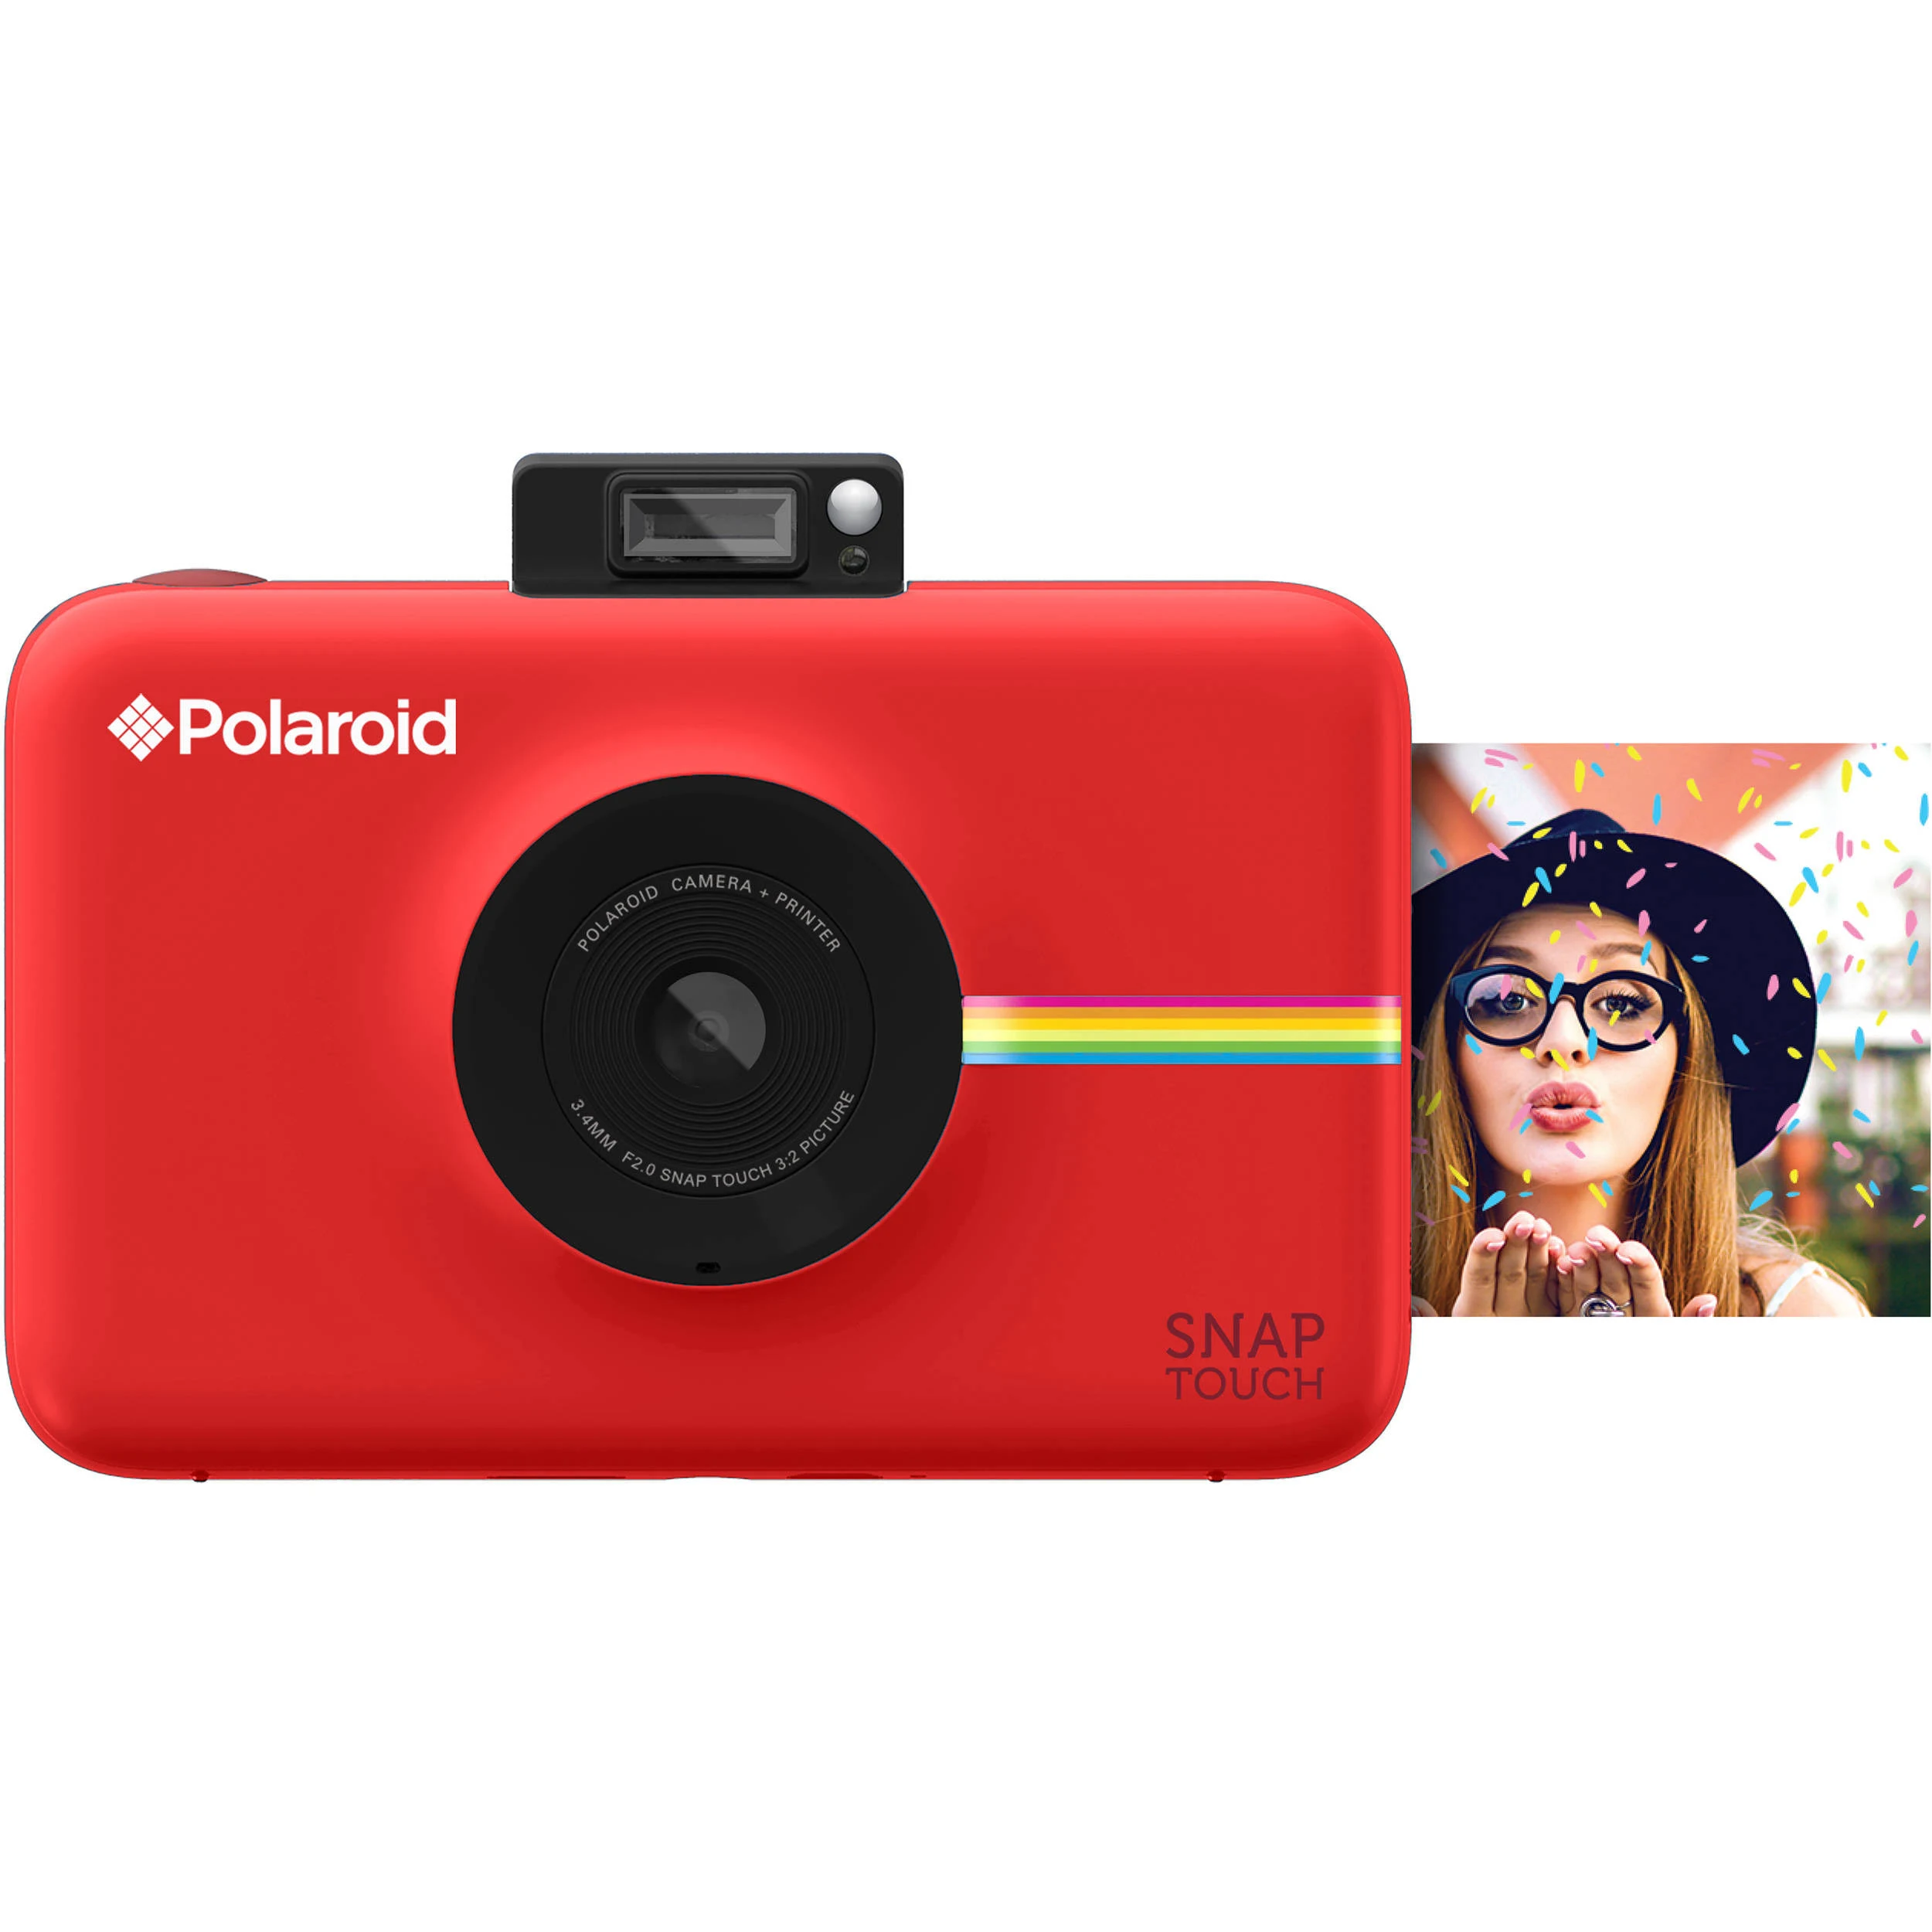 Polaroid Snap Touch Instant Print Digital Camera With LCD Display (Red) with Zink Zero Ink Printing Technology